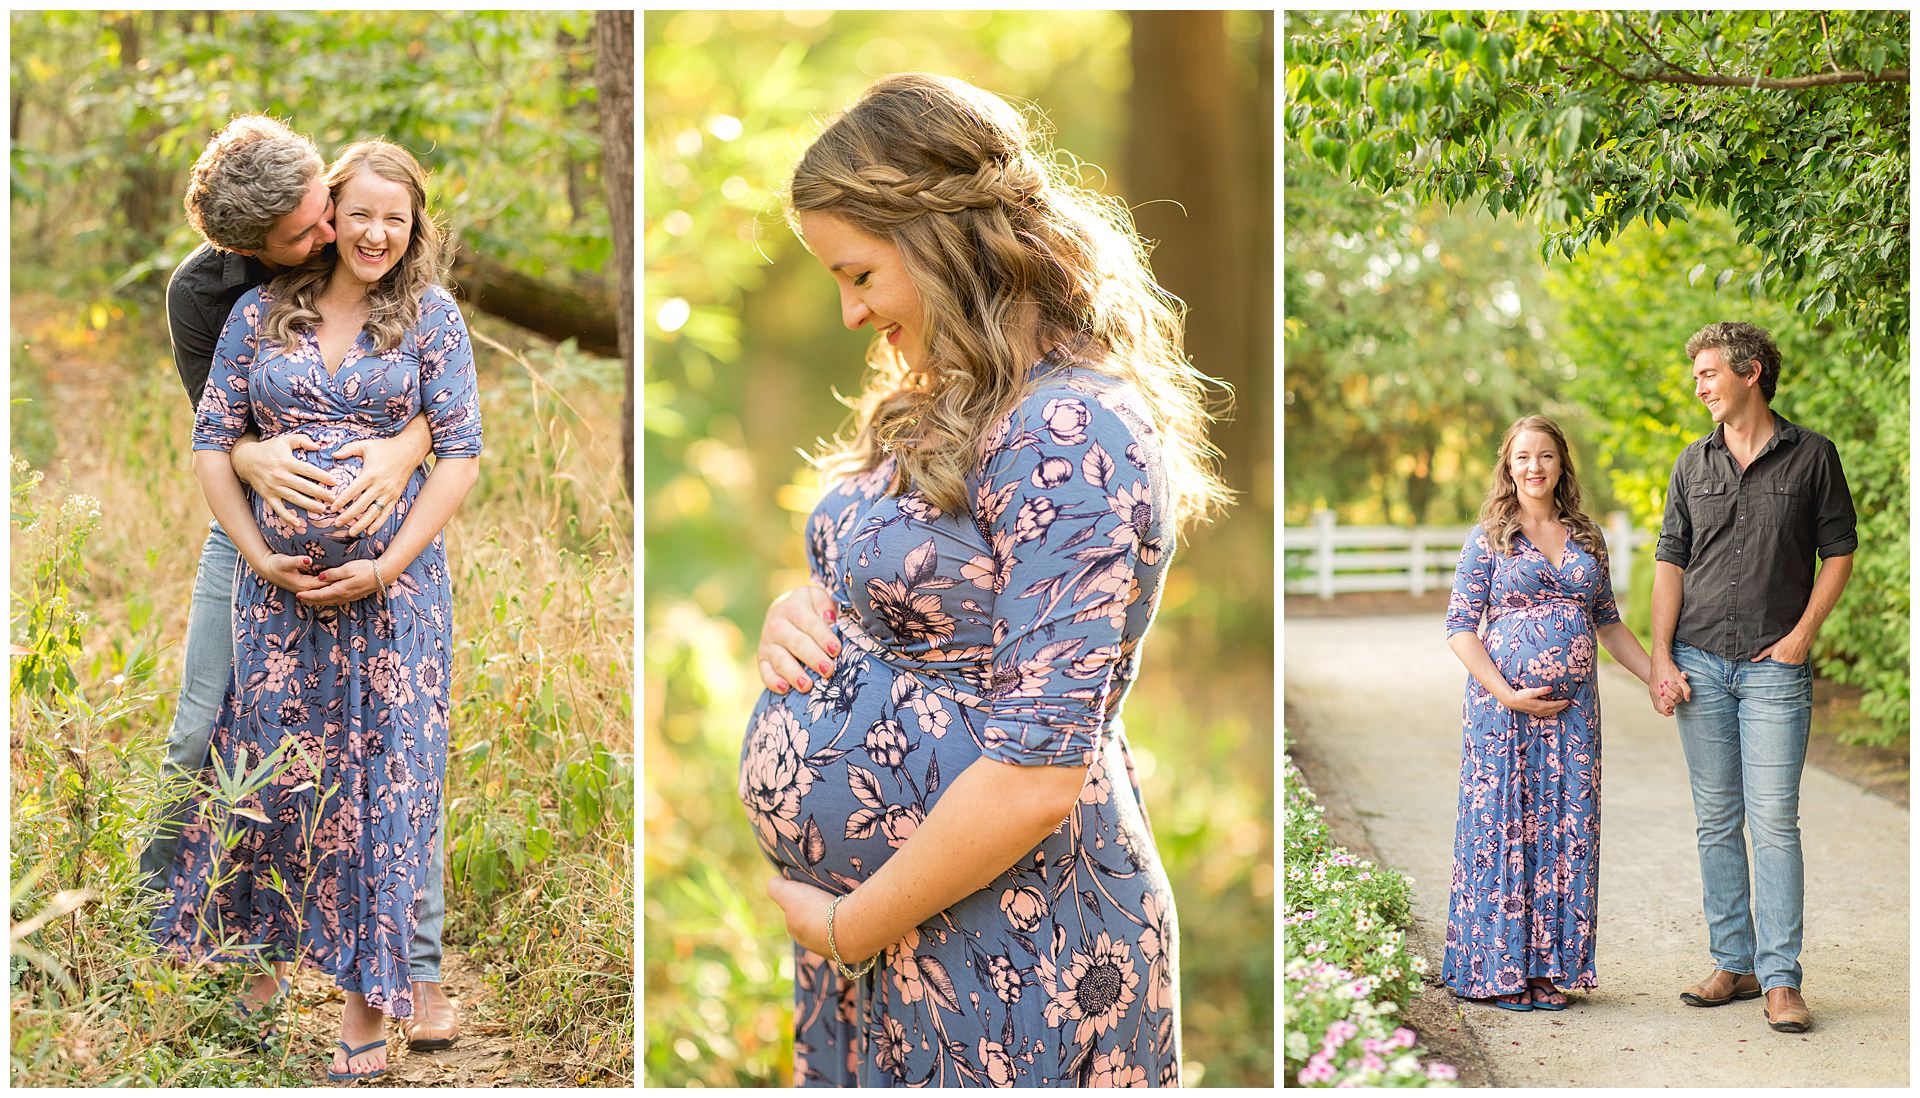 Fall Maternity Session at The Arboretum in Lexington, Kentucky